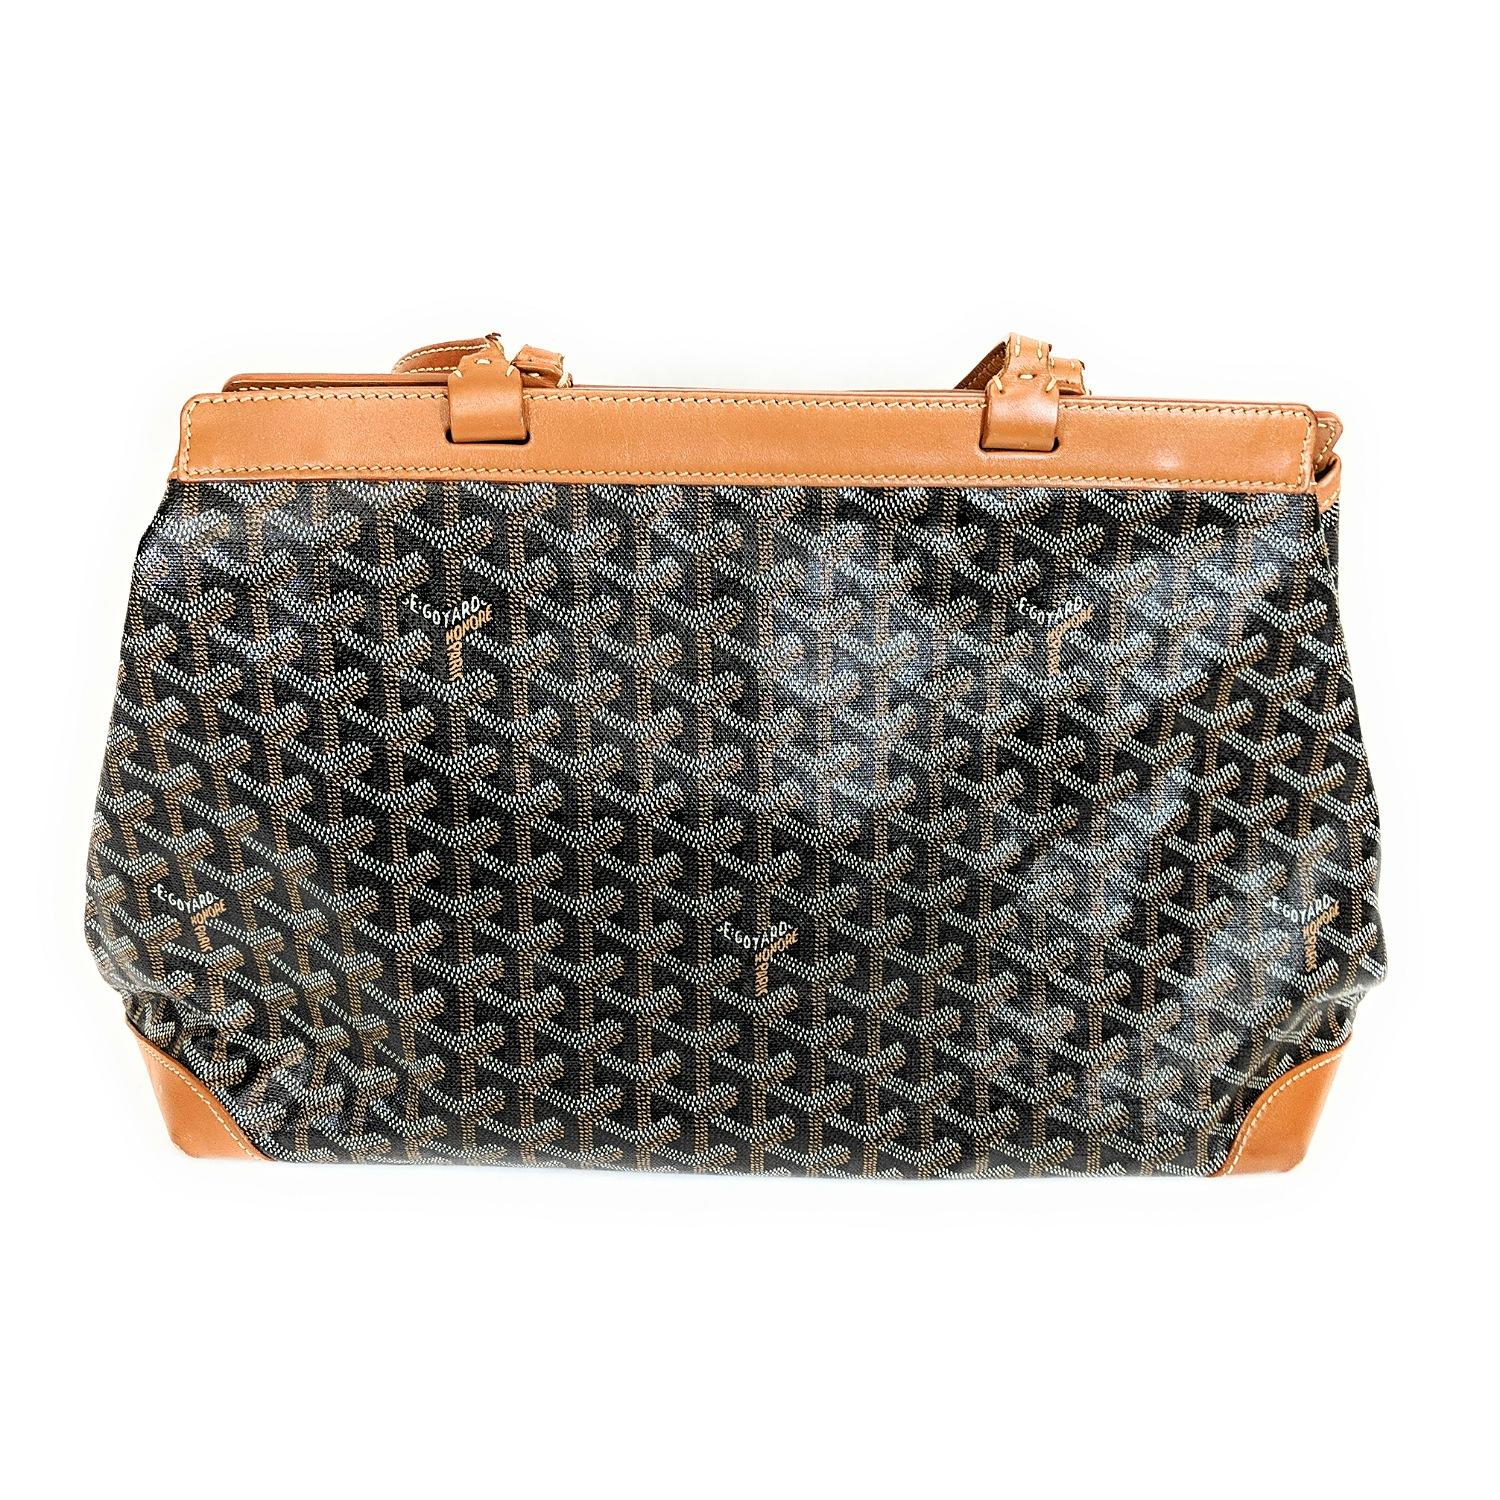 Black and multicolor hand-painted Goyardine coated canvas Goyard Bellechasse PM with silver-tone hardware, beige contrast stitching, caramel smooth leather trim, dual flat shoulder straps, beige woven lining, single pocket at interior wall and